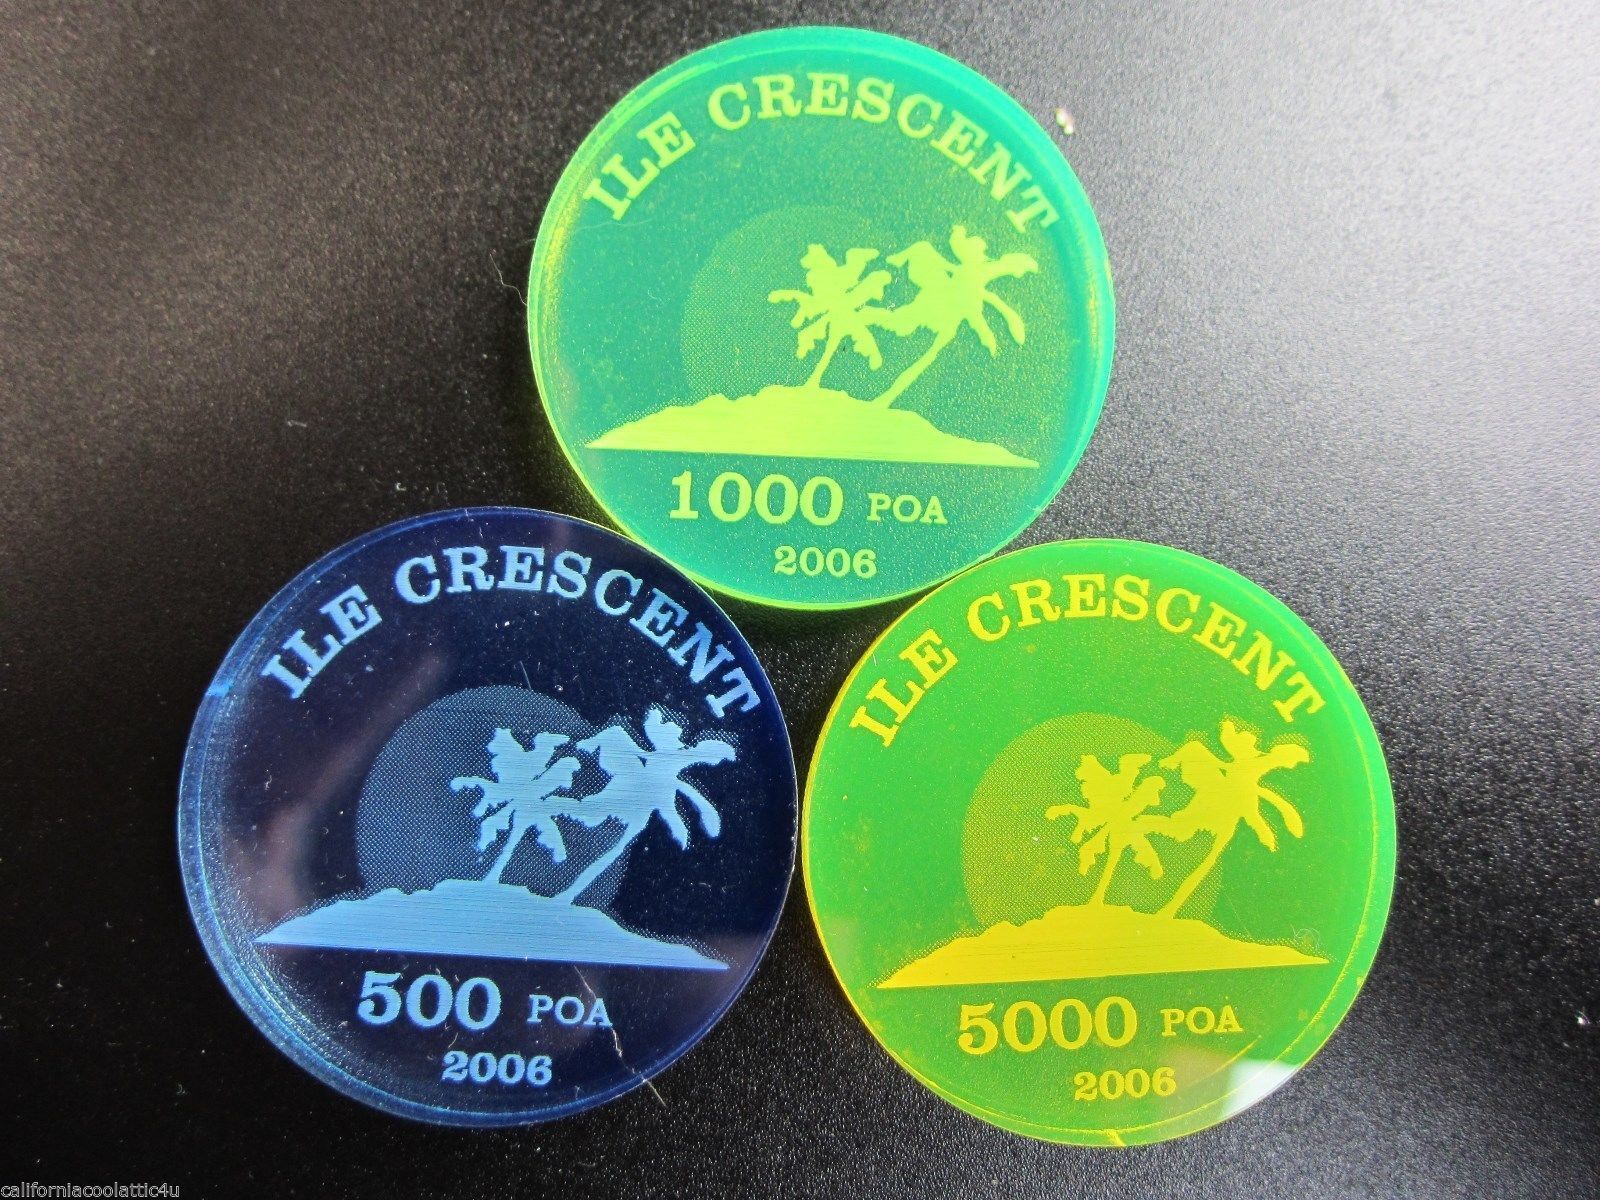 3 - UNUSUAL BEAUTIFUL "RARE ACRYLIC COINS" OF CRESCENT ISL. ONLY434 MINTED! Без бренда